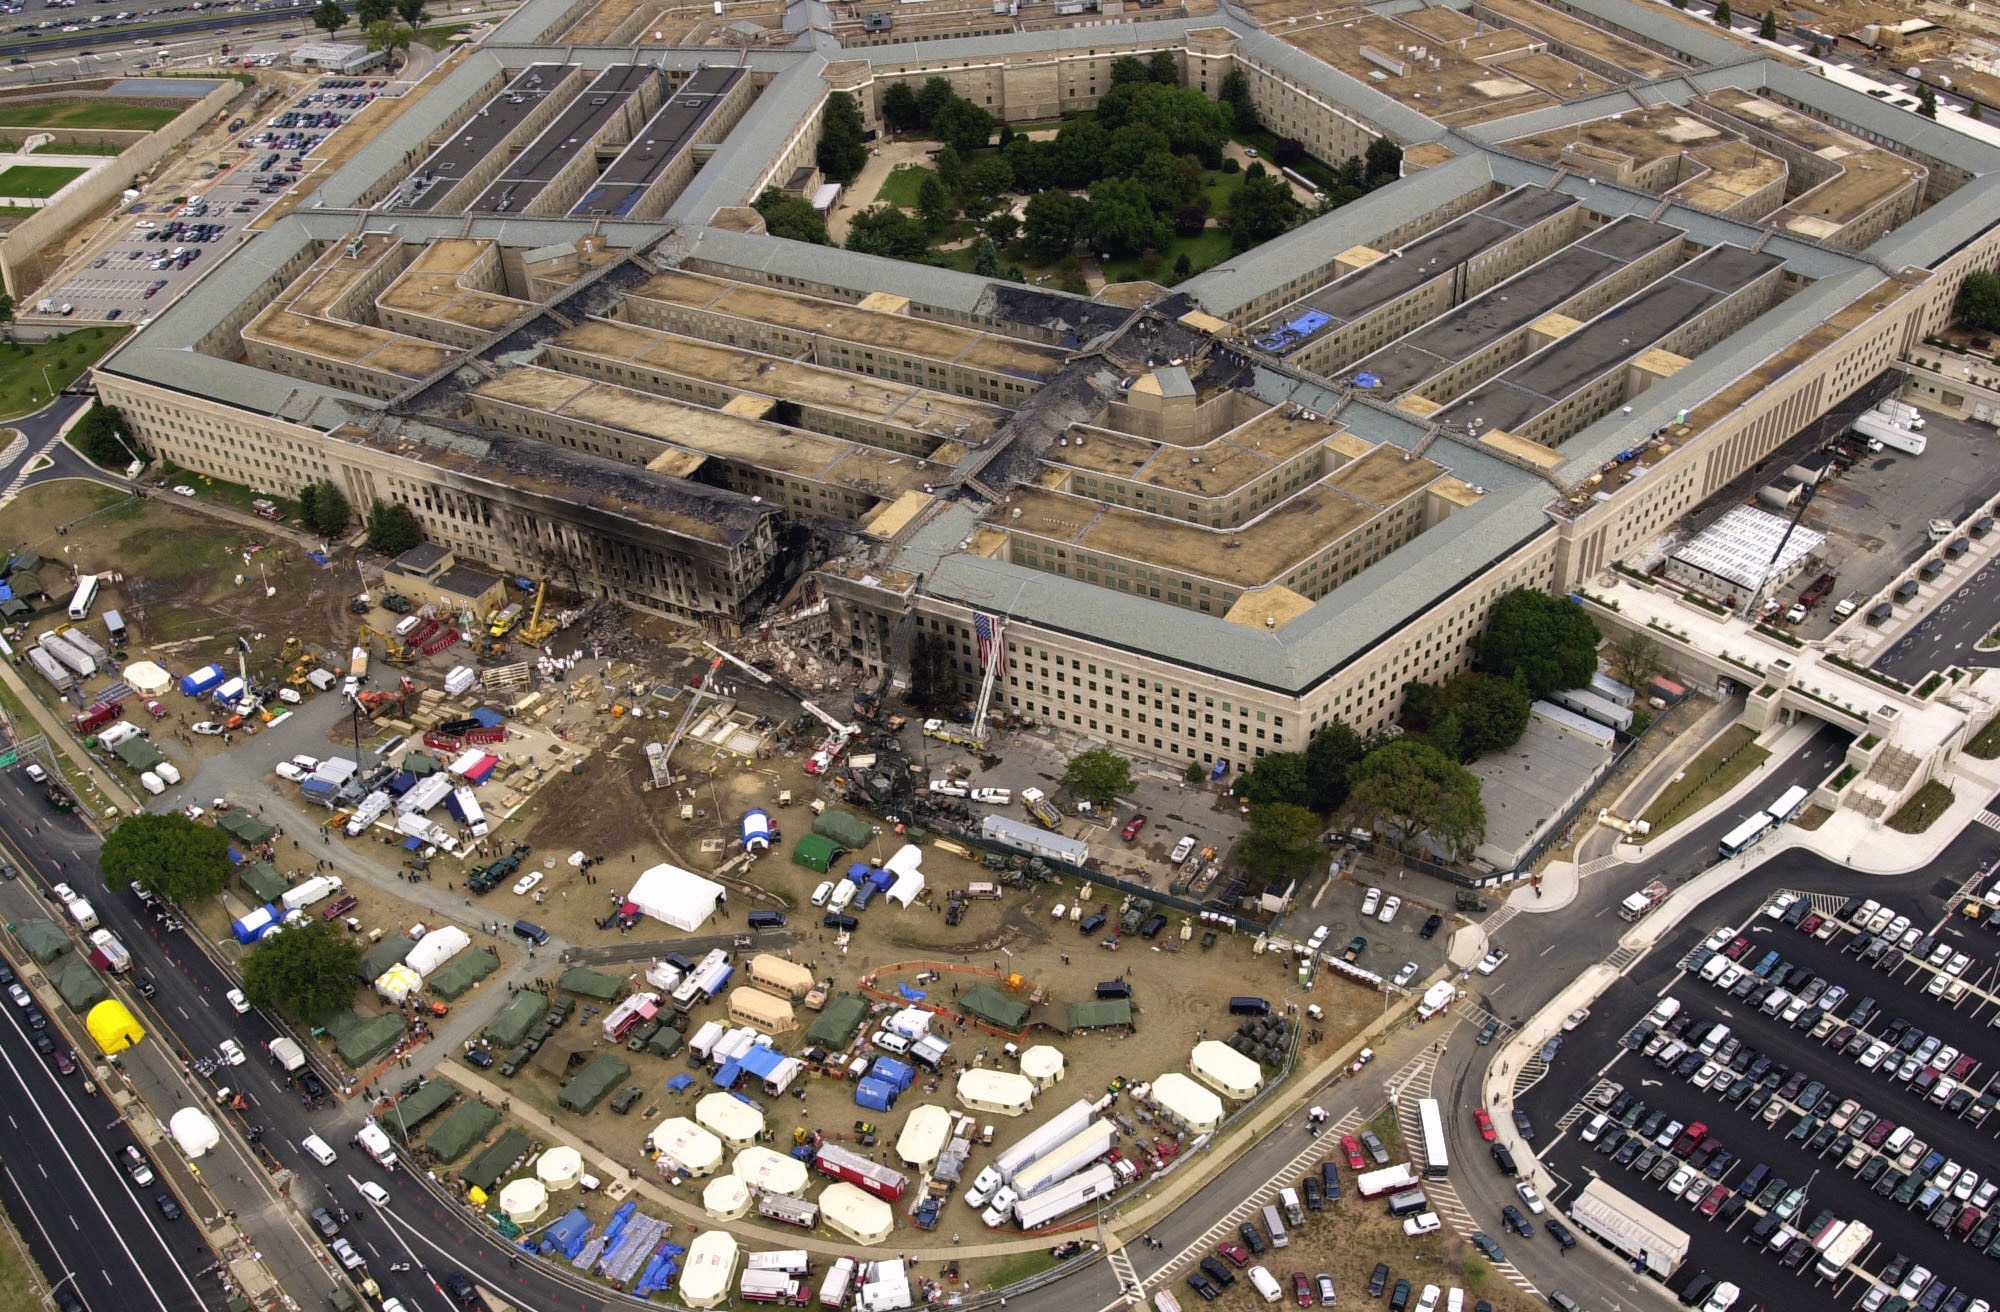 WASHINGTON, D.C. -- An overall aerial view, three days later, of the impact point at the Pentagon where the hijacked American Airlines Flight 77, a Boeing 757-200 entered, breaking up in the process. Cynthia Fleming, a Defense Travel System budget analyst with the Air Force Civil Engineer Center, was working in the Pentagon on Sept. 11, 2001, when the aircraft crashed into the building. (U.S Air Force photo/Tech. Sgt. Cedric Rudisill)